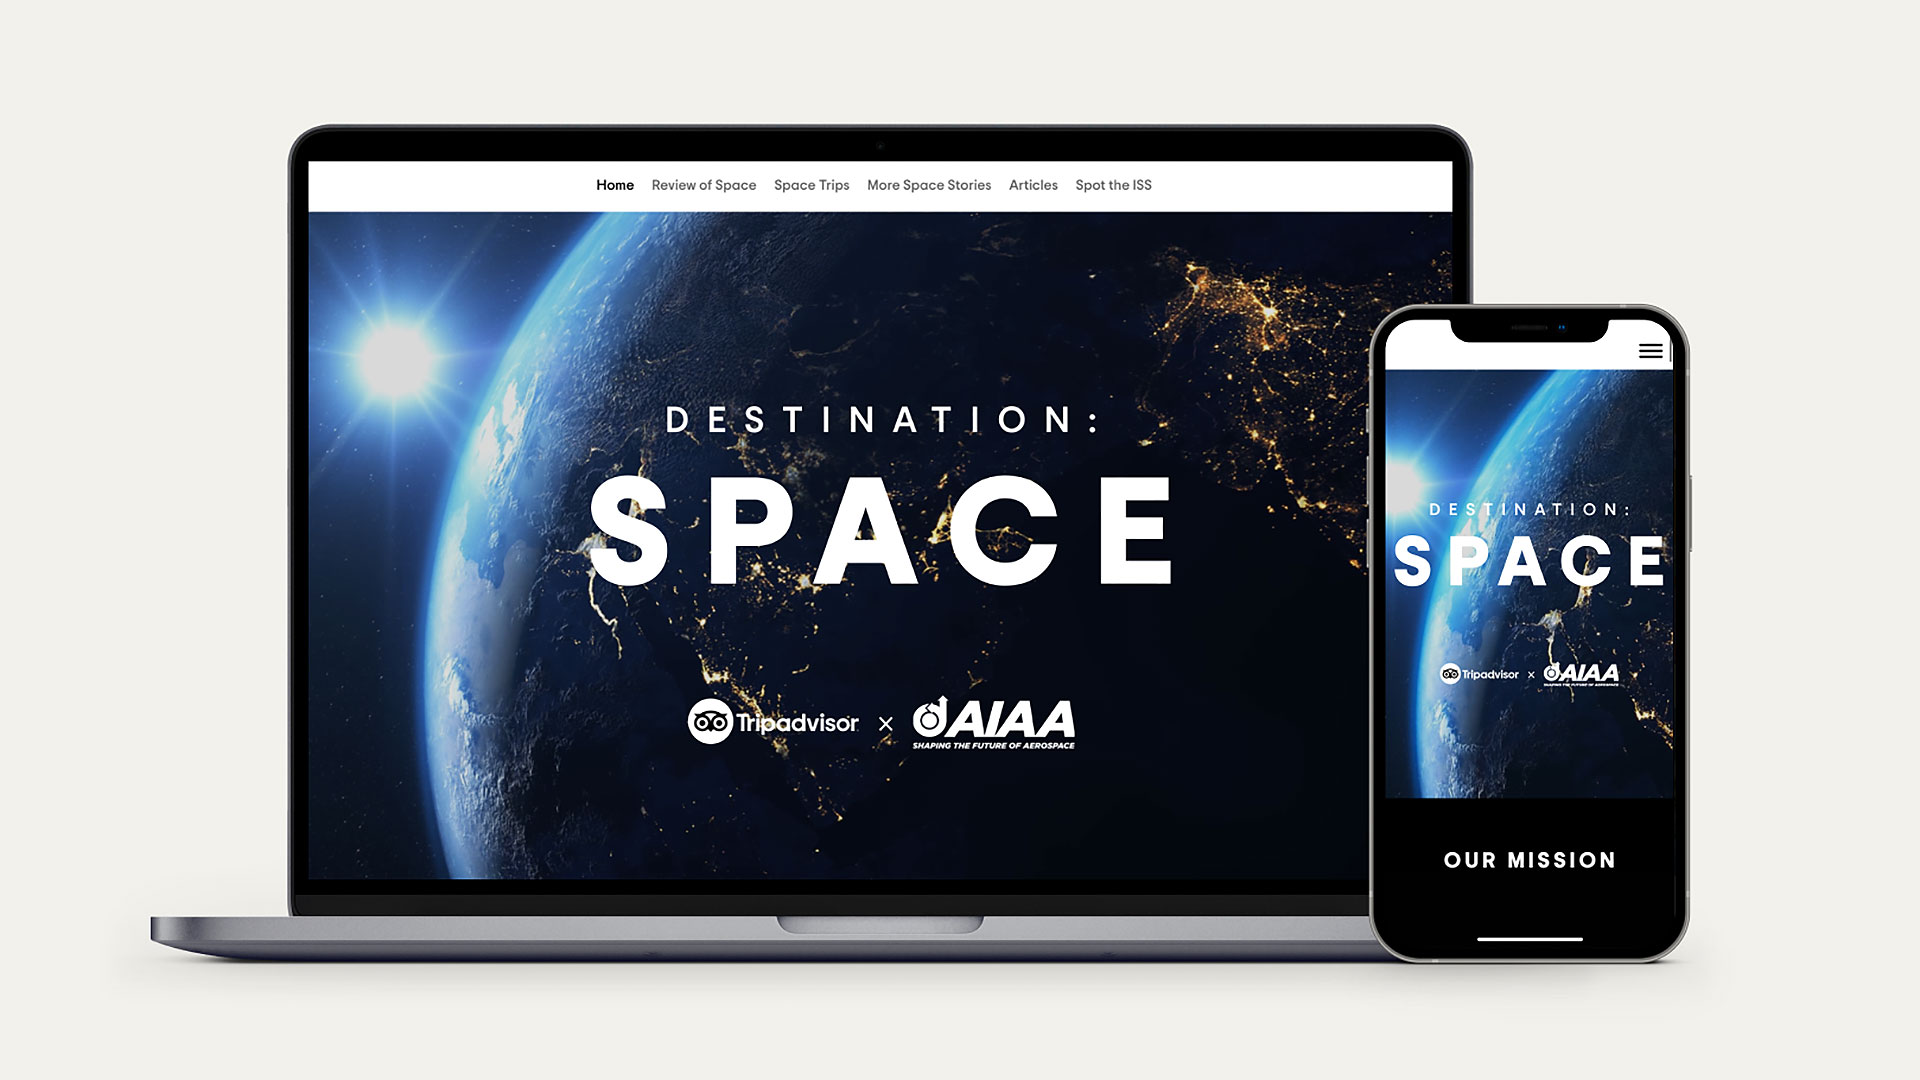 Where to? Space: Tripadvisor publishes 1st off-Earth travel review Space